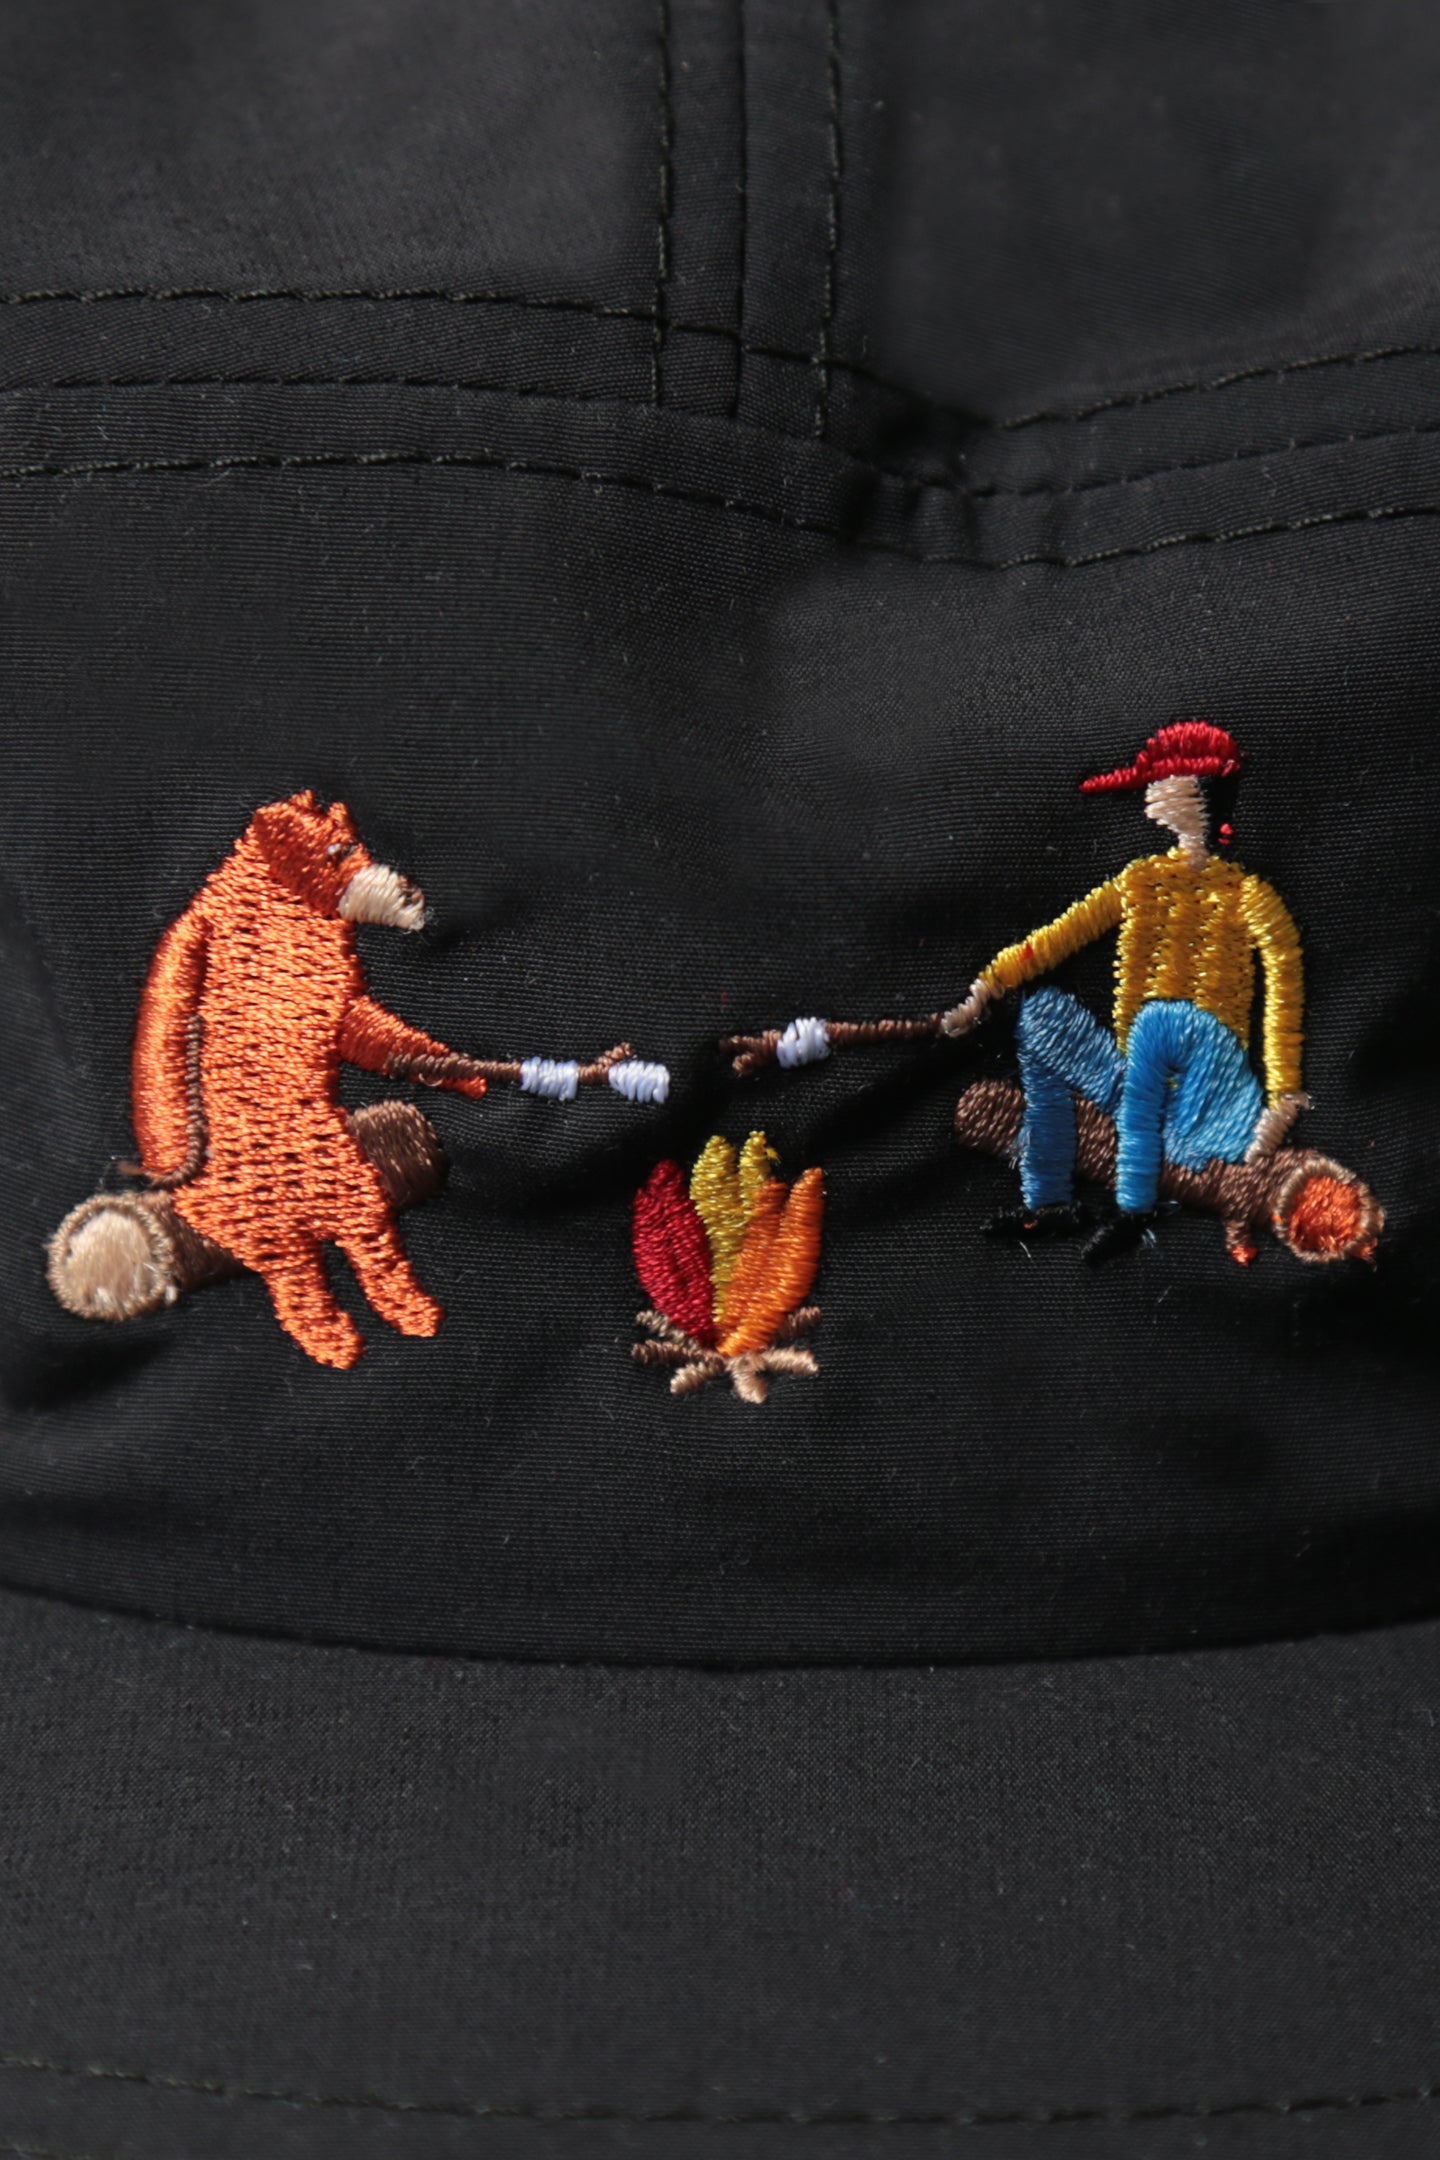 5 Panel - Black Nylon - Campfire Friends Embroidery - CAMP Series